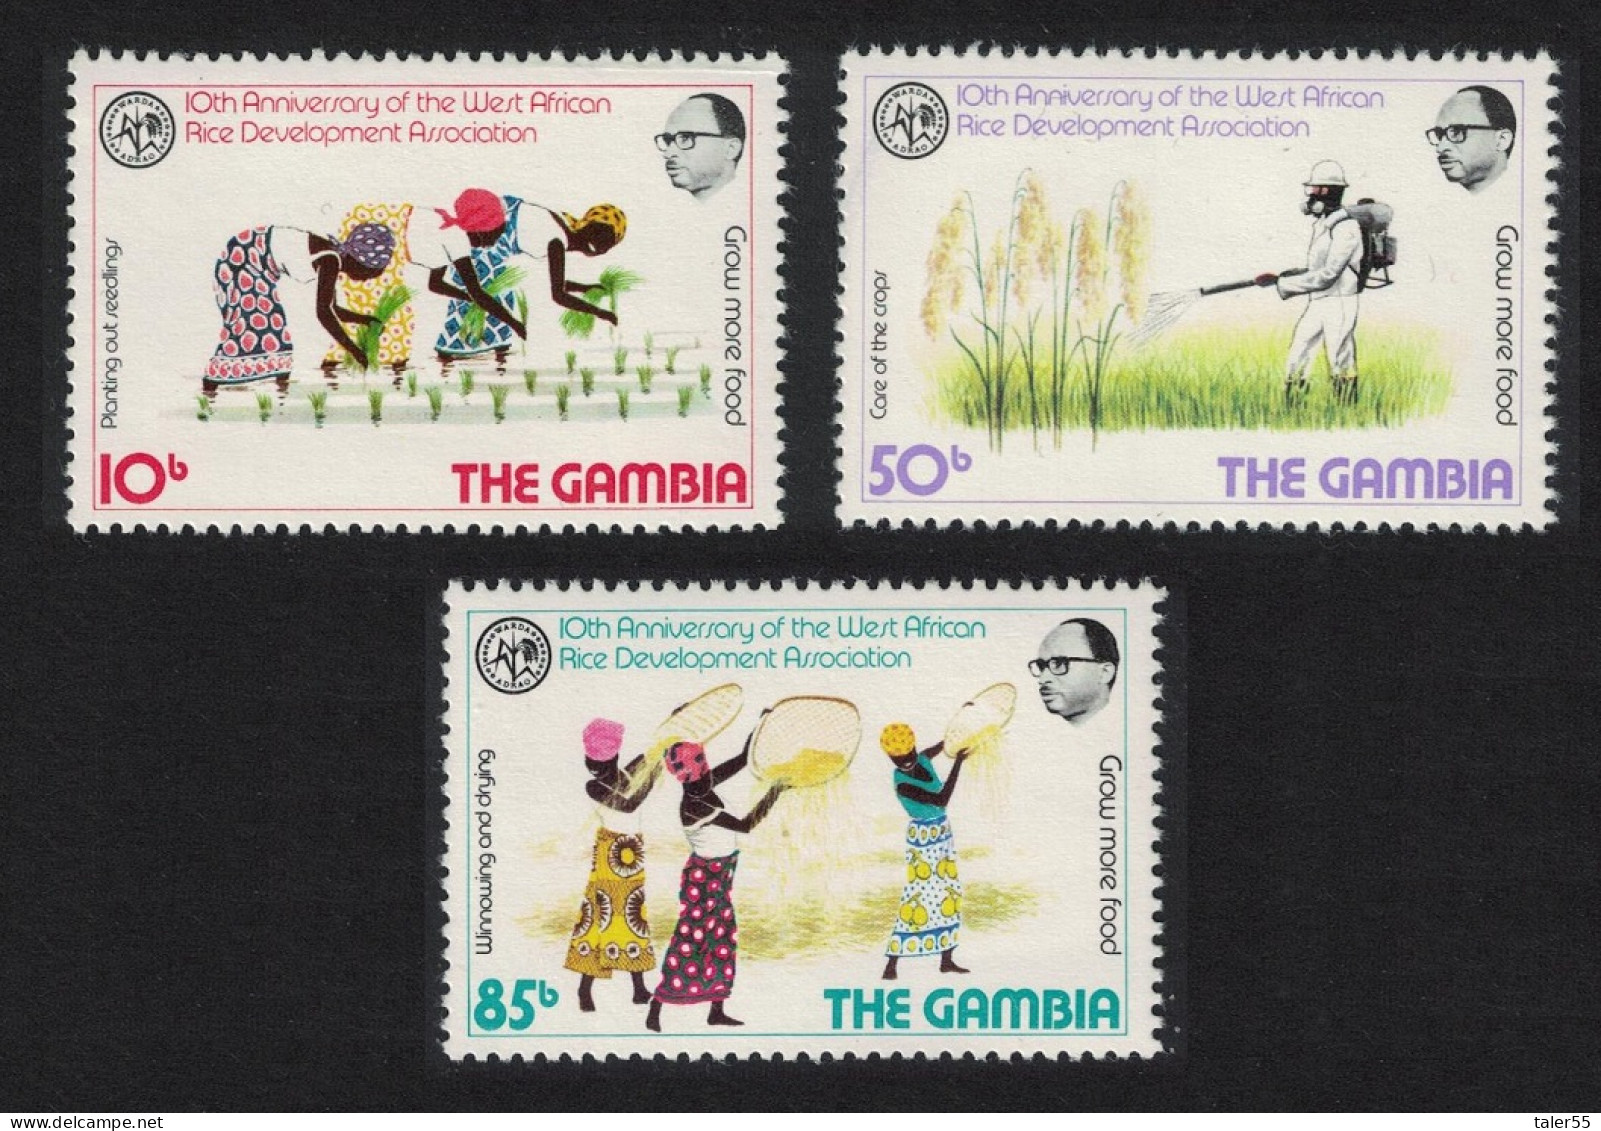 Gambia Tenth Anniversary Of West African Rice Development Association 3v 1981 MNH SG#457-459 - Gambie (1965-...)